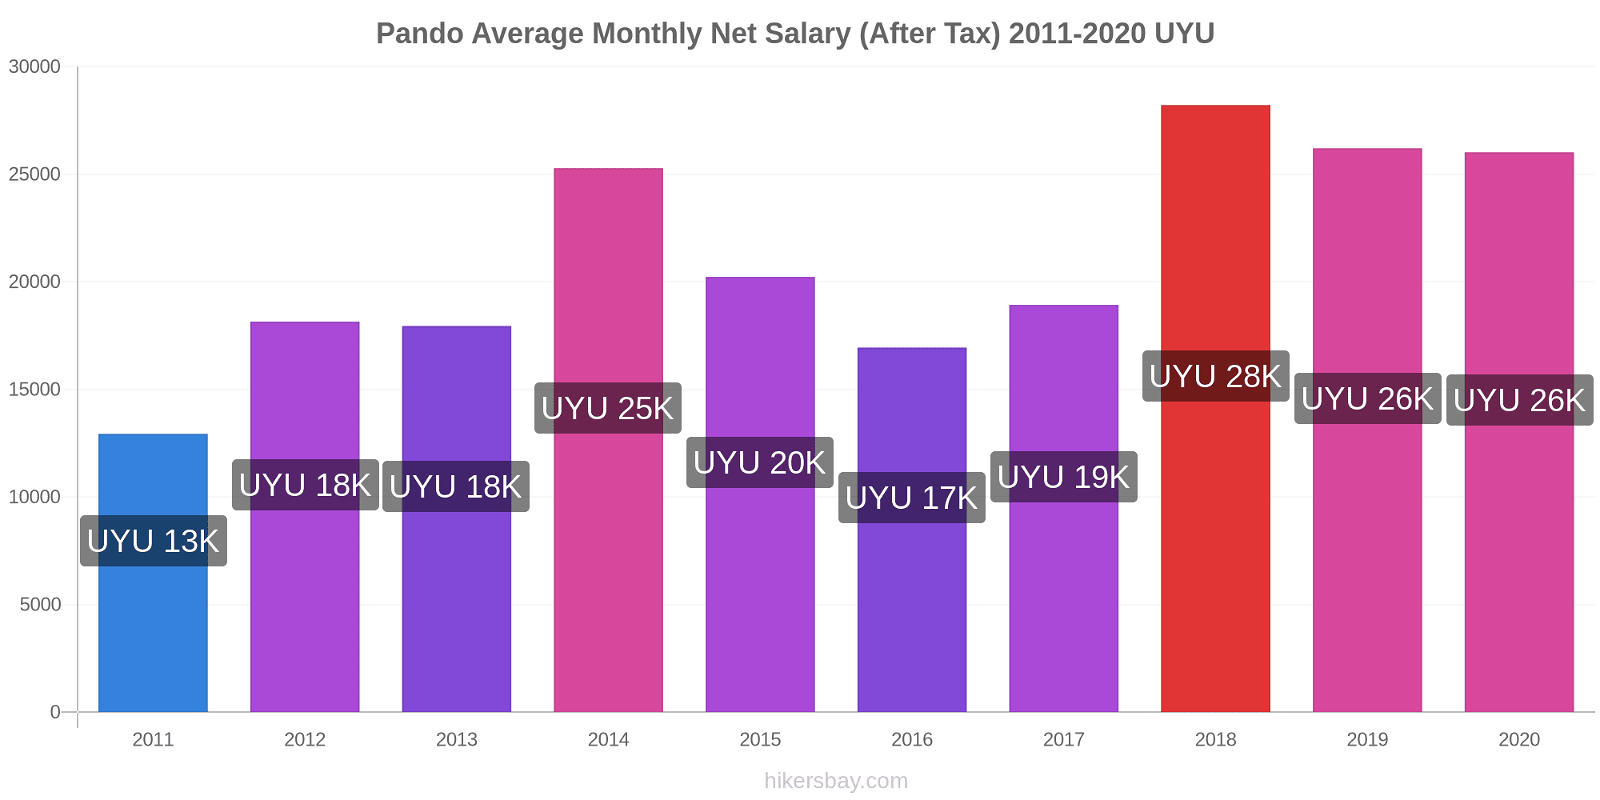 Pando price changes Average Monthly Net Salary (After Tax) hikersbay.com